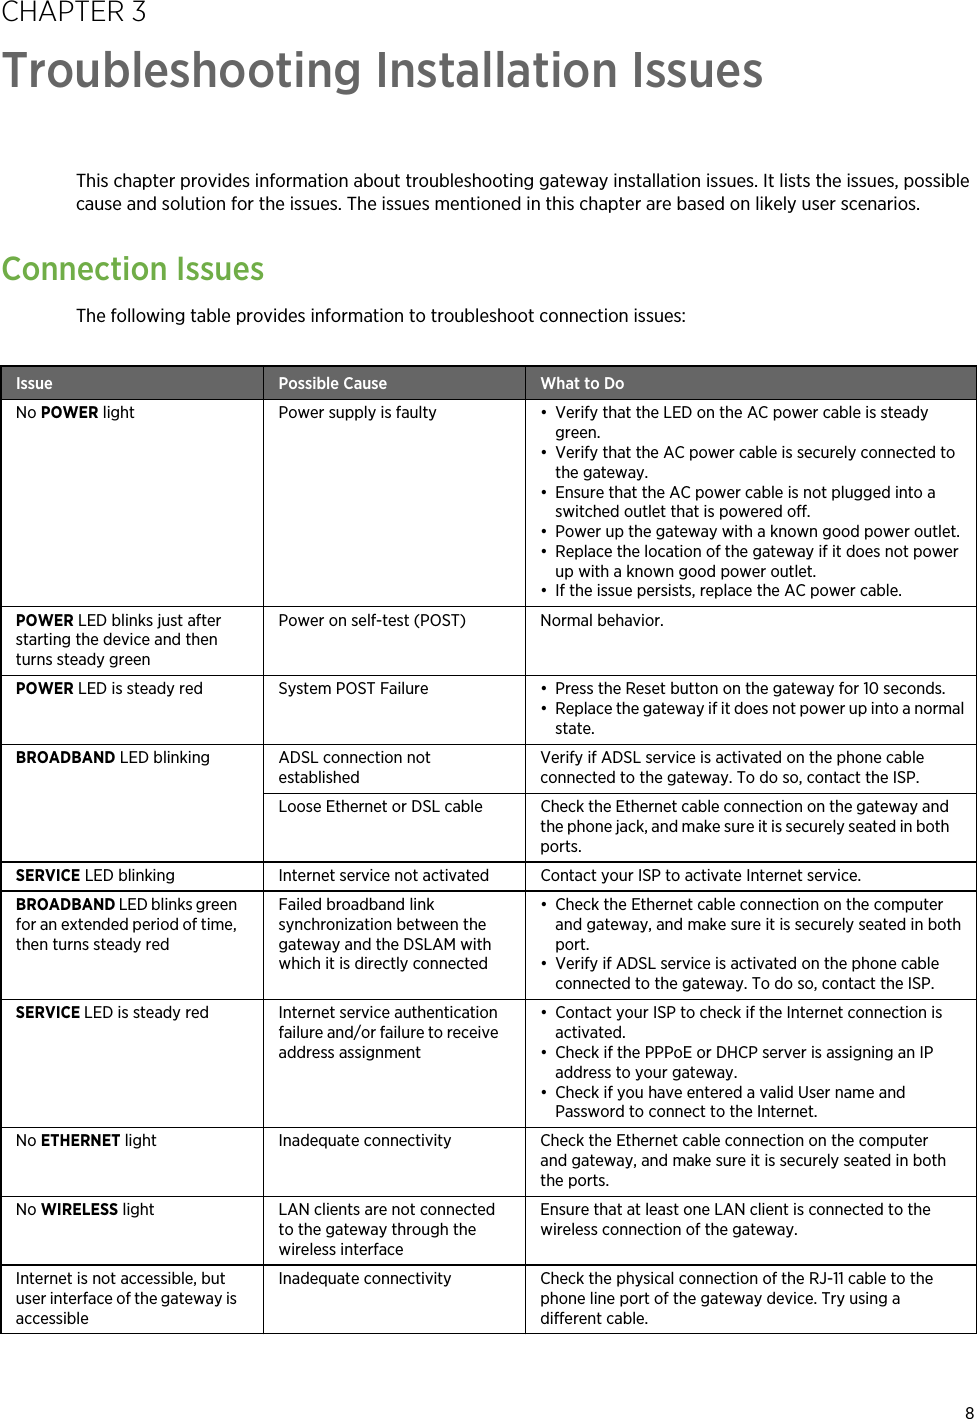 8CHAPTER 3Troubleshooting Installation IssuesThis chapter provides information about troubleshooting gateway installation issues. It lists the issues, possible cause and solution for the issues. The issues mentioned in this chapter are based on likely user scenarios.Connection IssuesThe following table provides information to troubleshoot connection issues:Issue Possible Cause What to DoNo POWER light Power supply is faulty • Verify that the LED on the AC power cable is steady green.• Verify that the AC power cable is securely connected to the gateway.• Ensure that the AC power cable is not plugged into a switched outlet that is powered off.• Power up the gateway with a known good power outlet.• Replace the location of the gateway if it does not power up with a known good power outlet.• If the issue persists, replace the AC power cable.POWER LED blinks just after starting the device and then turns steady greenPower on self-test (POST) Normal behavior.POWER LED is steady red System POST Failure • Press the Reset button on the gateway for 10 seconds.• Replace the gateway if it does not power up into a normal state.BROADBAND LED blinking ADSL connection not establishedVerify if ADSL service is activated on the phone cable connected to the gateway. To do so, contact the ISP.Loose Ethernet or DSL cable Check the Ethernet cable connection on the gateway and the phone jack, and make sure it is securely seated in both ports.SERVICE LED blinking Internet service not activated Contact your ISP to activate Internet service.BROADBAND LED blinks green for an extended period of time, then turns steady redFailed broadband link synchronization between the gateway and the DSLAM with which it is directly connected• Check the Ethernet cable connection on the computer and gateway, and make sure it is securely seated in both port.• Verify if ADSL service is activated on the phone cable connected to the gateway. To do so, contact the ISP.SERVICE LED is steady red Internet service authentication failure and/or failure to receive address assignment• Contact your ISP to check if the Internet connection is activated.• Check if the PPPoE or DHCP server is assigning an IP address to your gateway.• Check if you have entered a valid User name and Password to connect to the Internet.No ETHERNET light Inadequate connectivity Check the Ethernet cable connection on the computer and gateway, and make sure it is securely seated in both the ports.No WIRELESS light LAN clients are not connected to the gateway through the wireless interfaceEnsure that at least one LAN client is connected to the wireless connection of the gateway.Internet is not accessible, but user interface of the gateway is accessibleInadequate connectivity Check the physical connection of the RJ-11 cable to the phone line port of the gateway device. Try using a different cable.